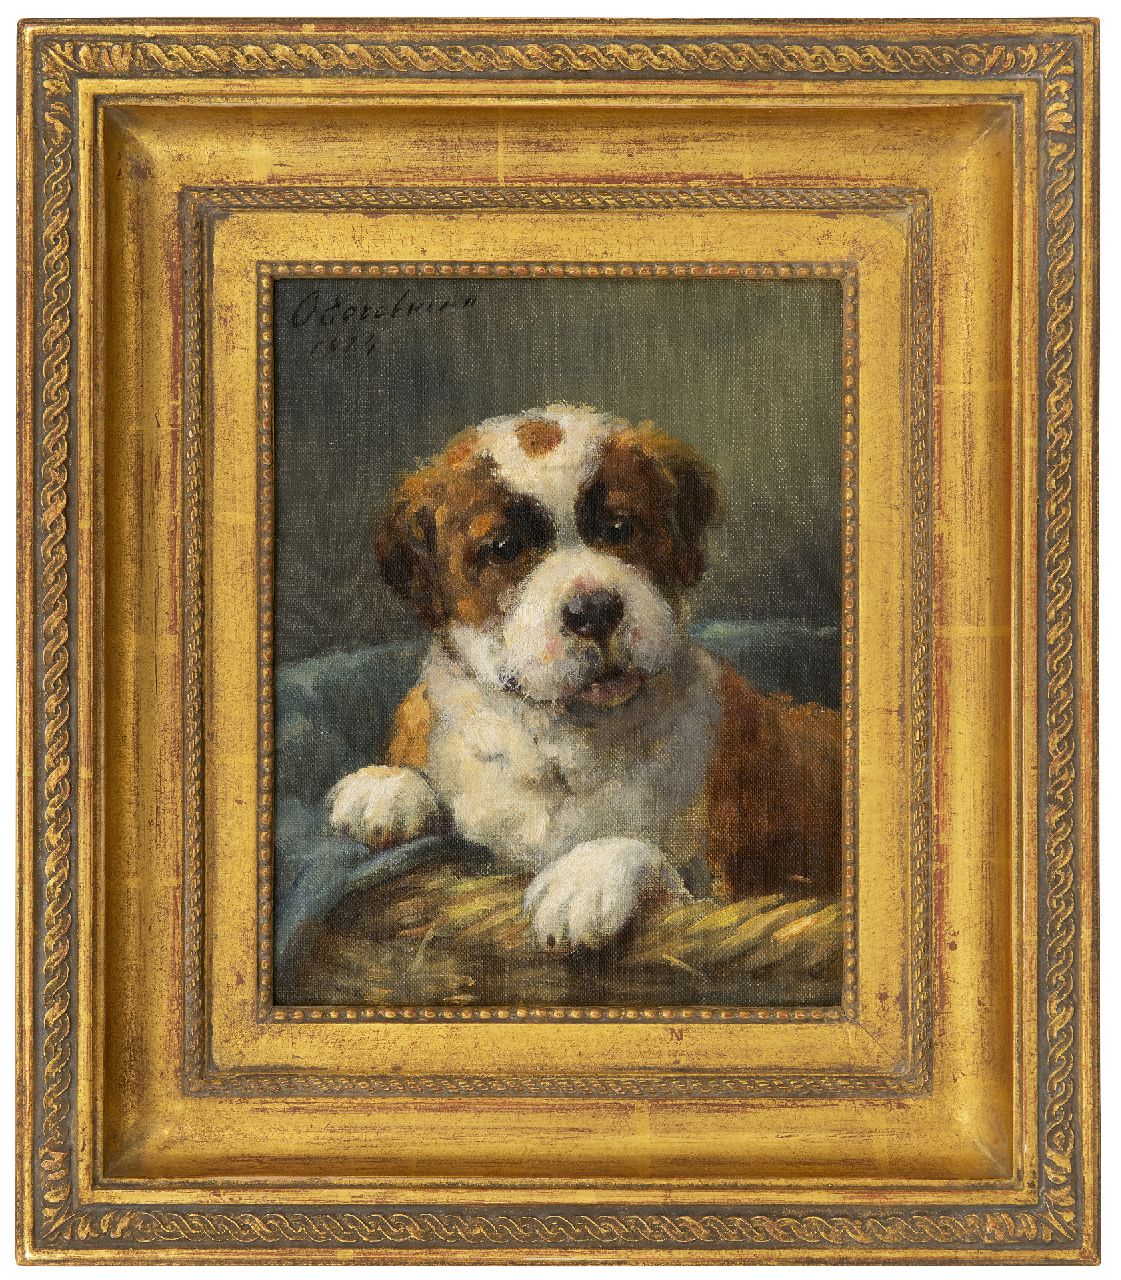 Eerelman O.  | Otto Eerelman | Paintings offered for sale | Saint Bernard puppy in his basket, oil on painter's board 23.8 x 18.8 cm, signed u.l. and dated 1924